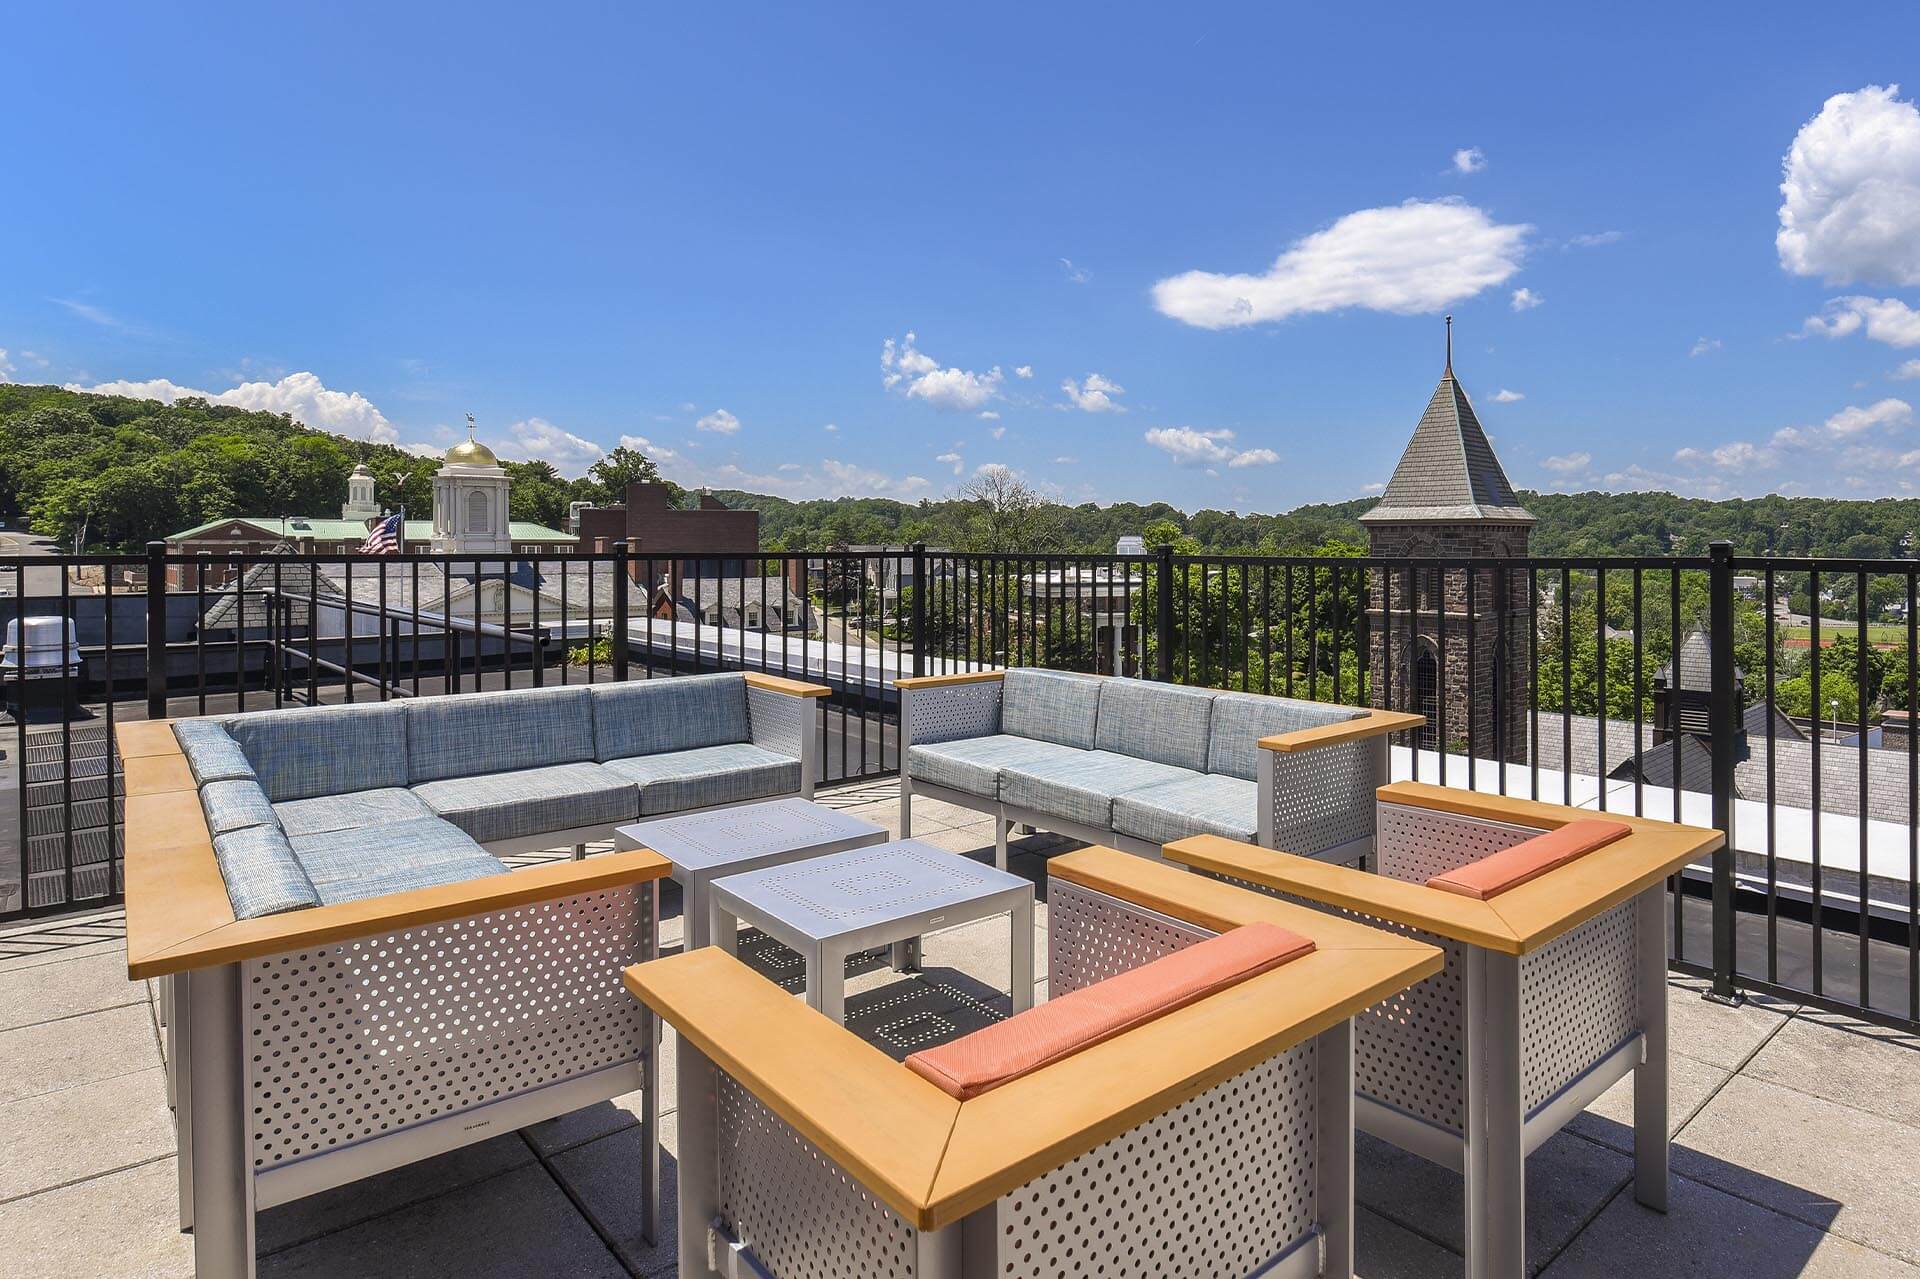 Rooftop lounge with chairs and tables at The Monroe, Morristown, New Jersey